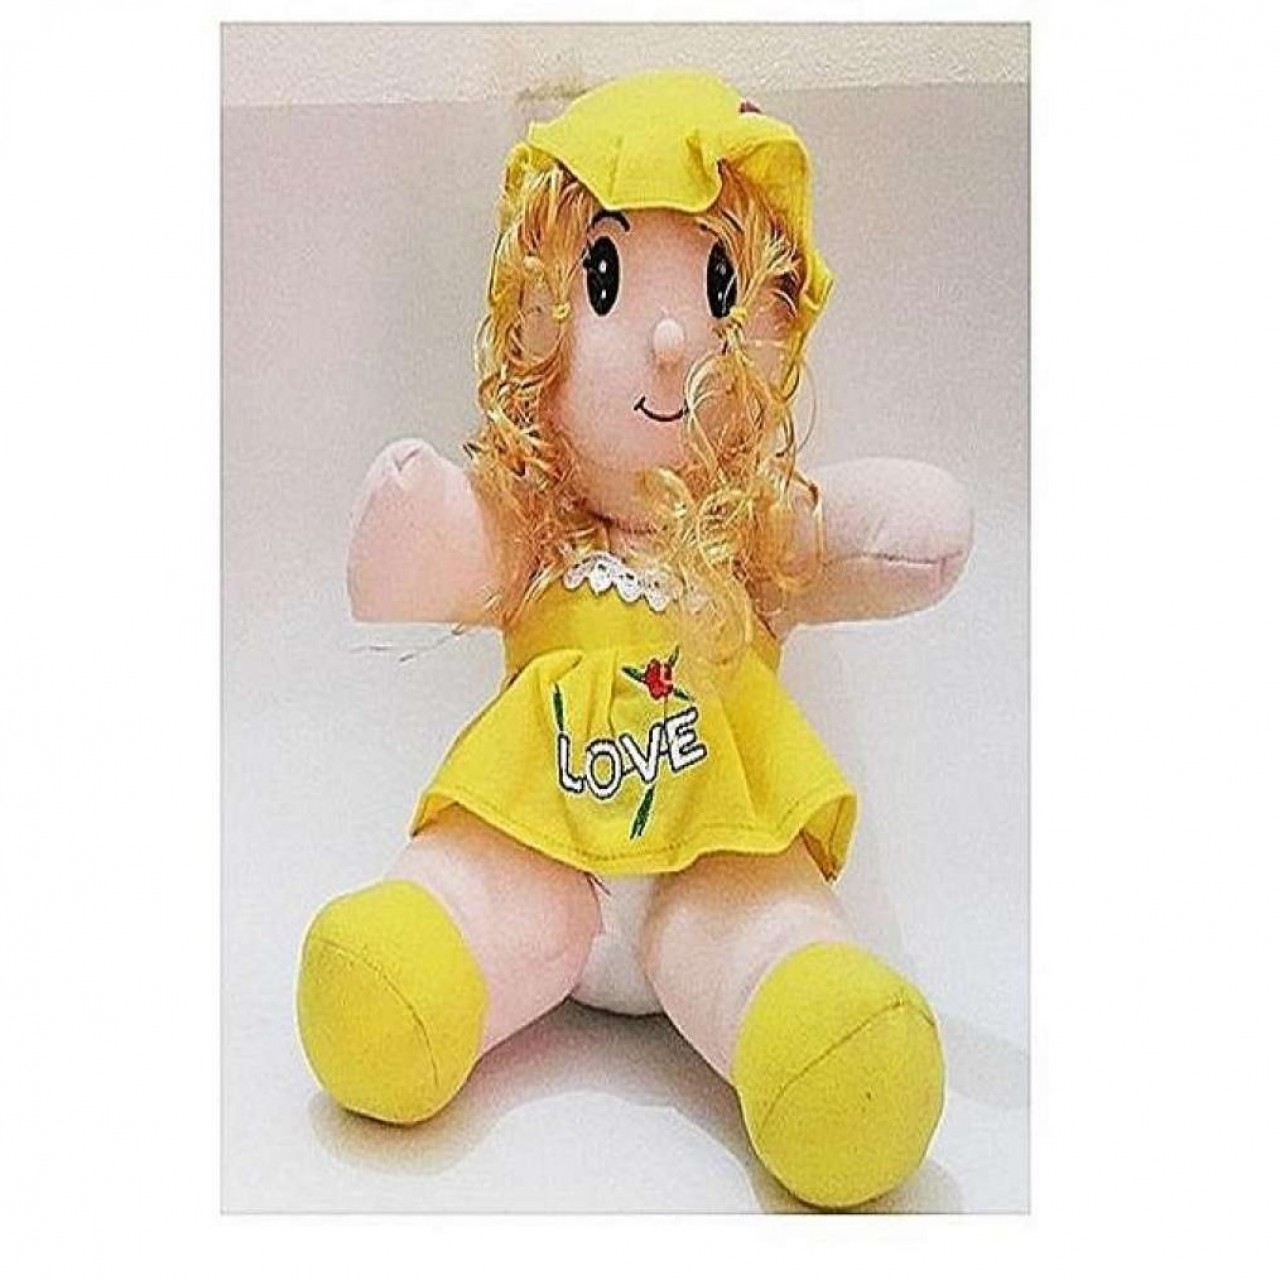 Sweet Baby Doll For Kids Toys